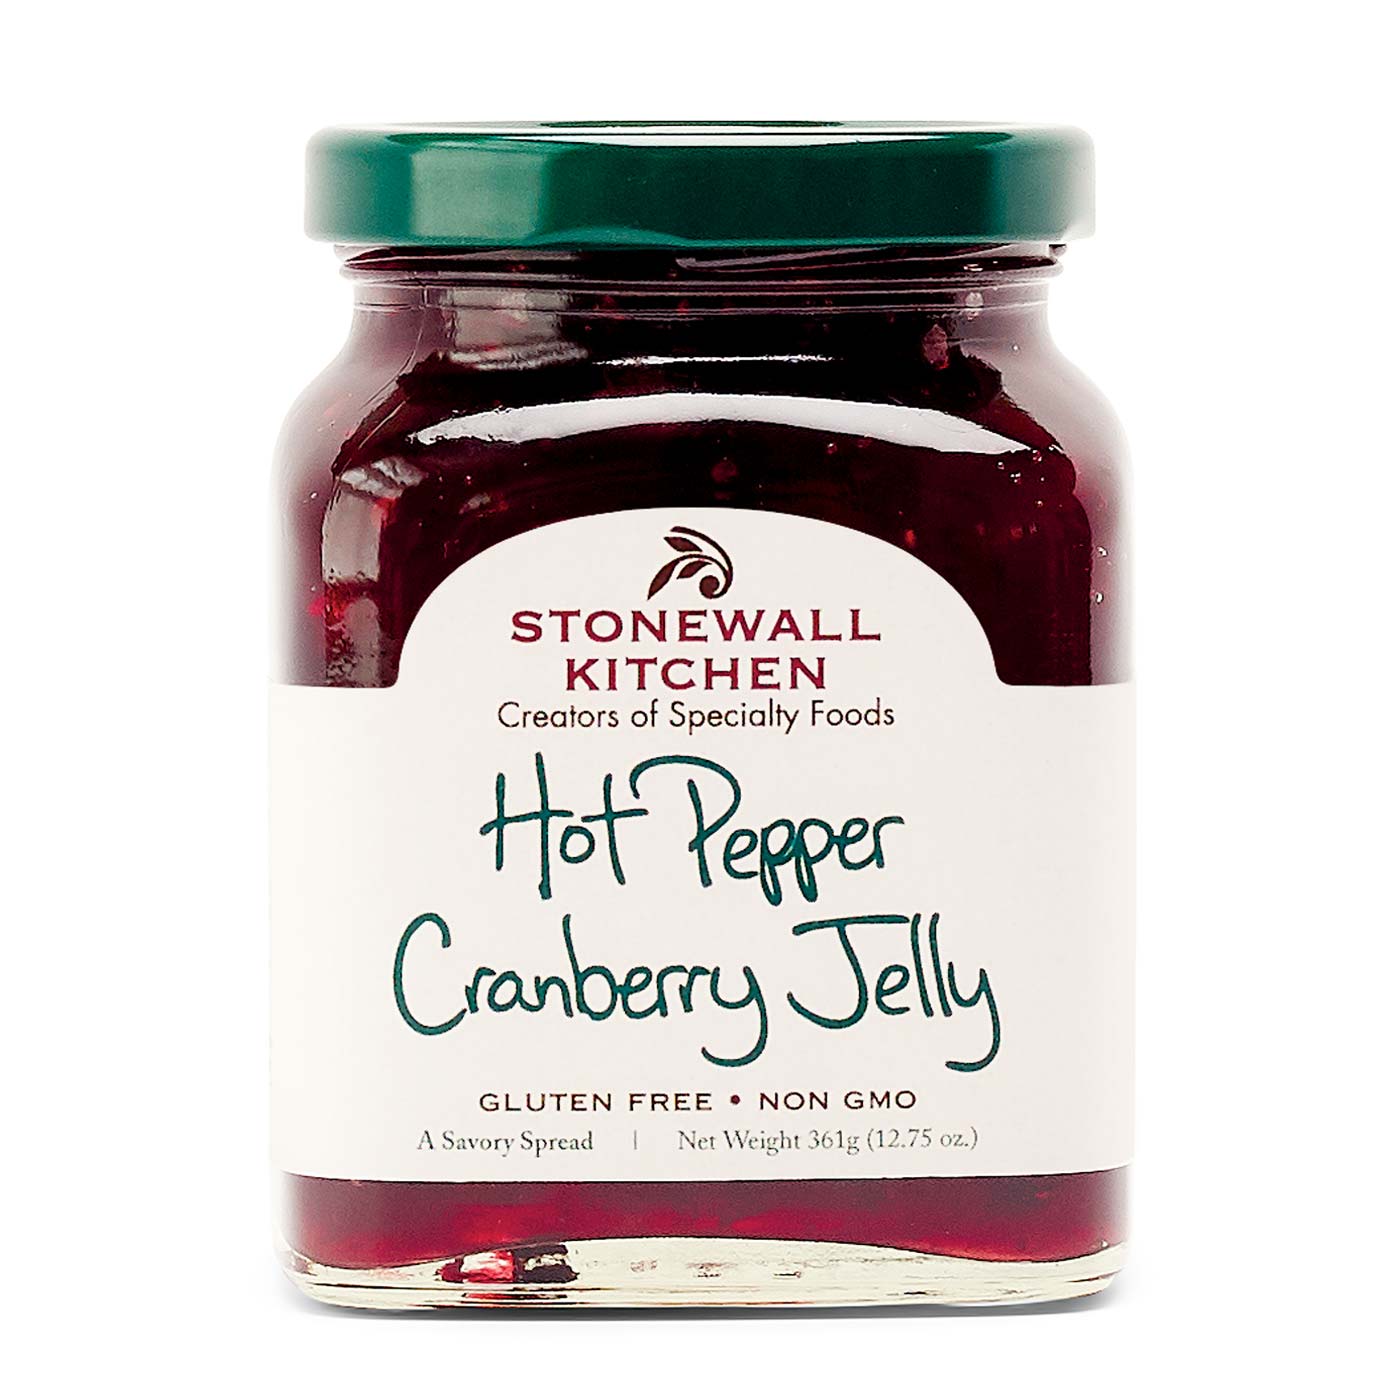 Jar of Stonewall Kitchen Hot Pepper Cranberry Jelly